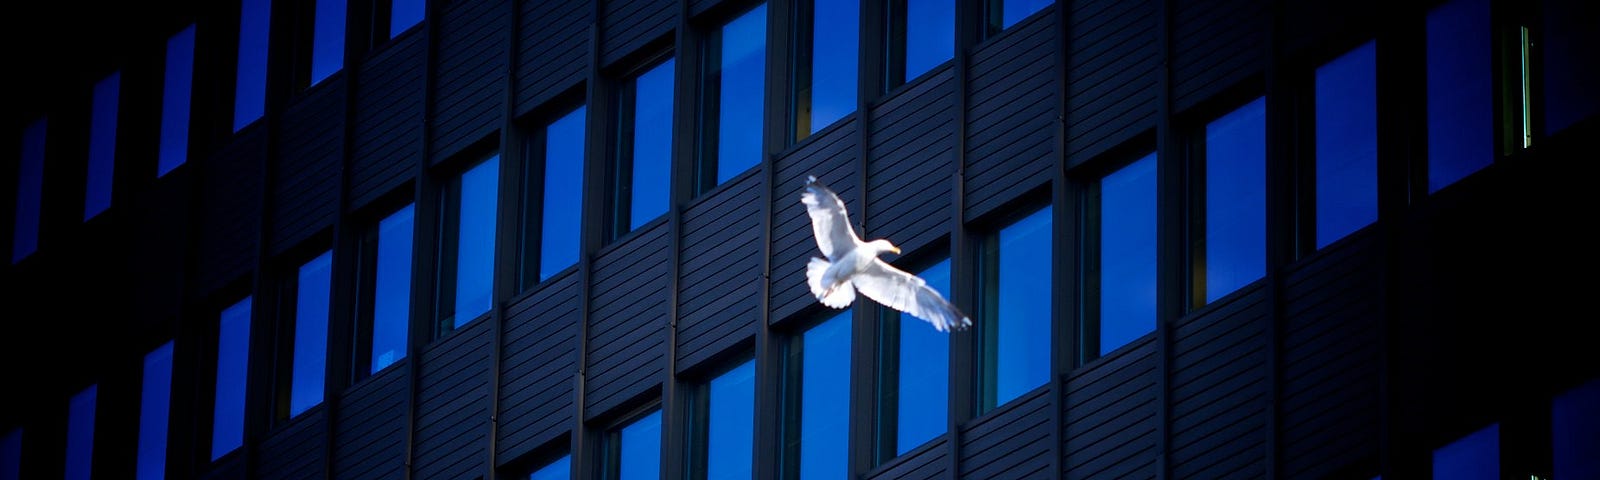 A photo of a dove flying across a building with blue-reflected windows.